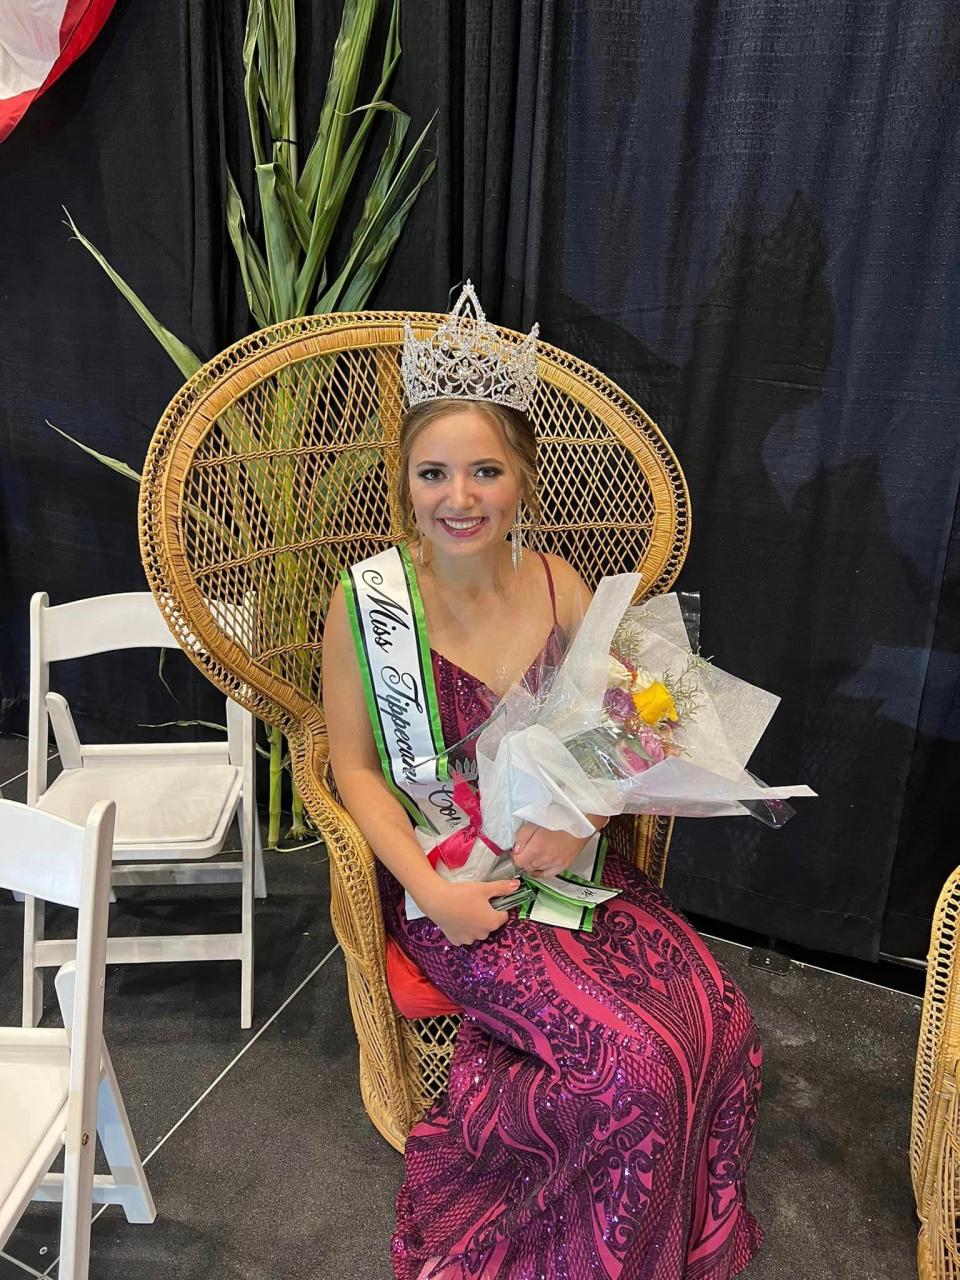 Lily Larson has been crowned this year's Tippecanoe County 4-H Pageant Queen.